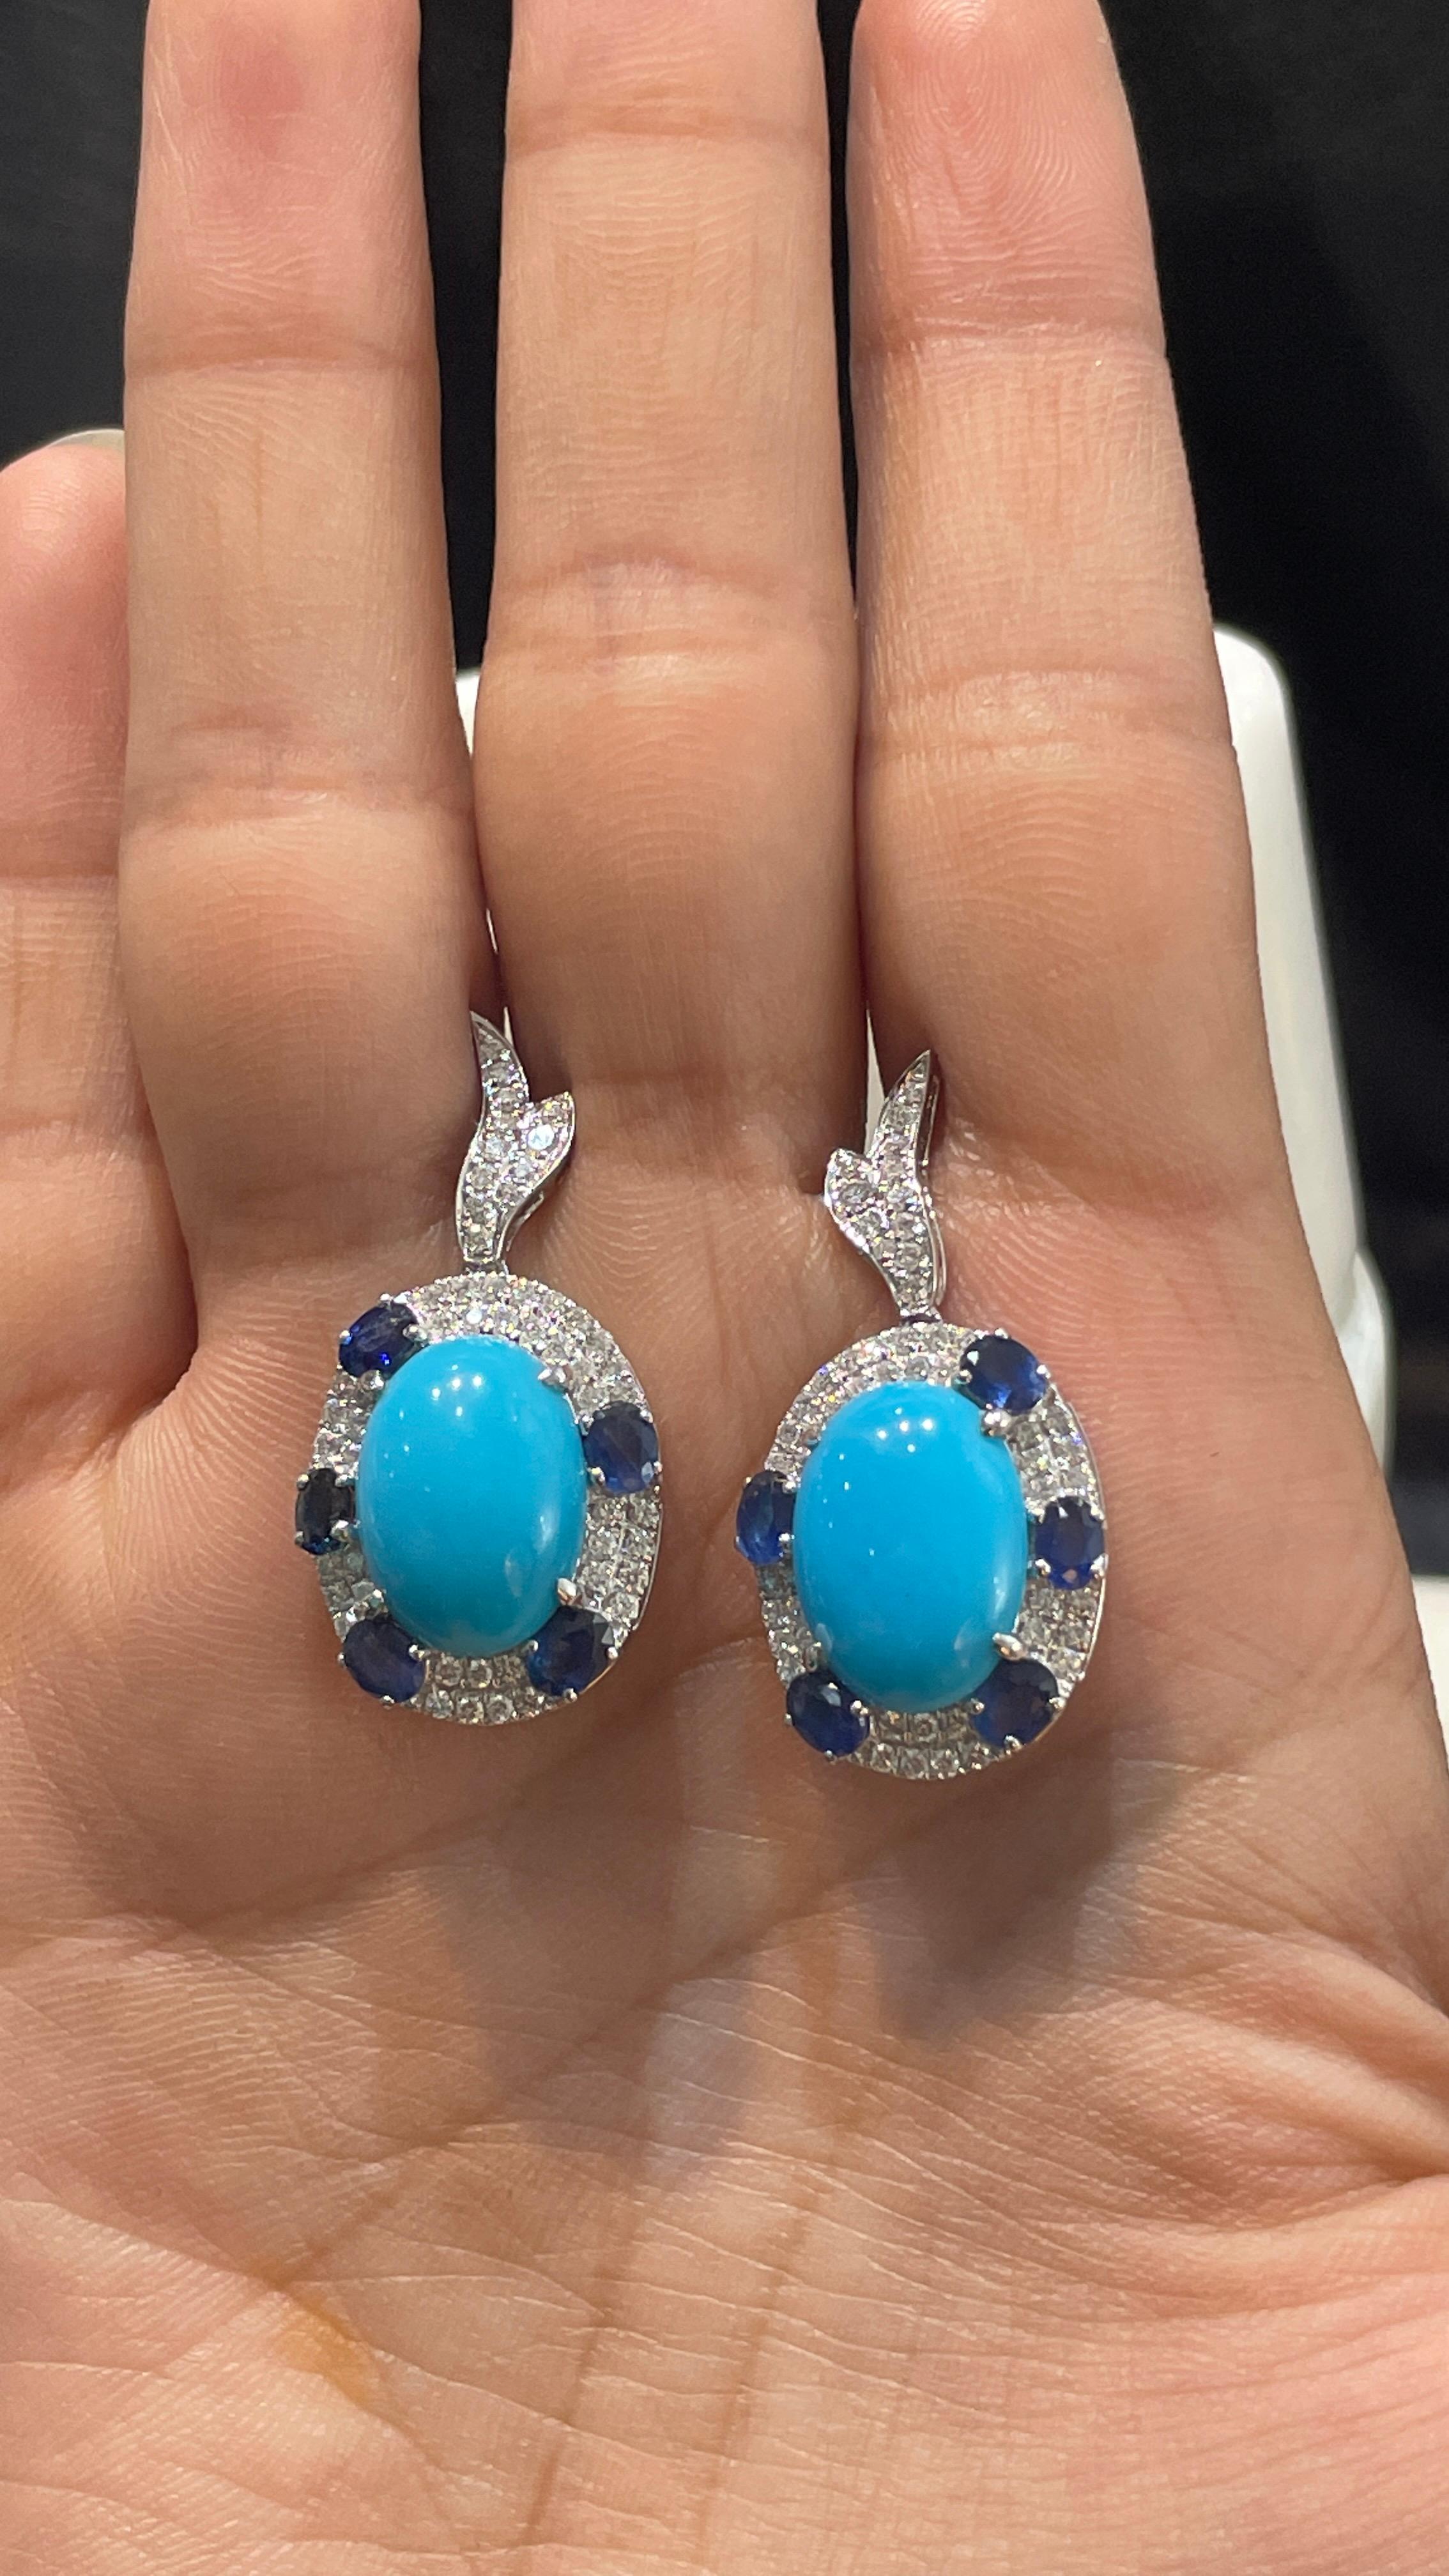 Blue Sapphire and Turquoise Drop earrings to make a statement with your look. These earrings create a sparkling, luxurious look featuring oval cut gemstone.
If you love to gravitate towards unique styles, this piece of jewelry is perfect for